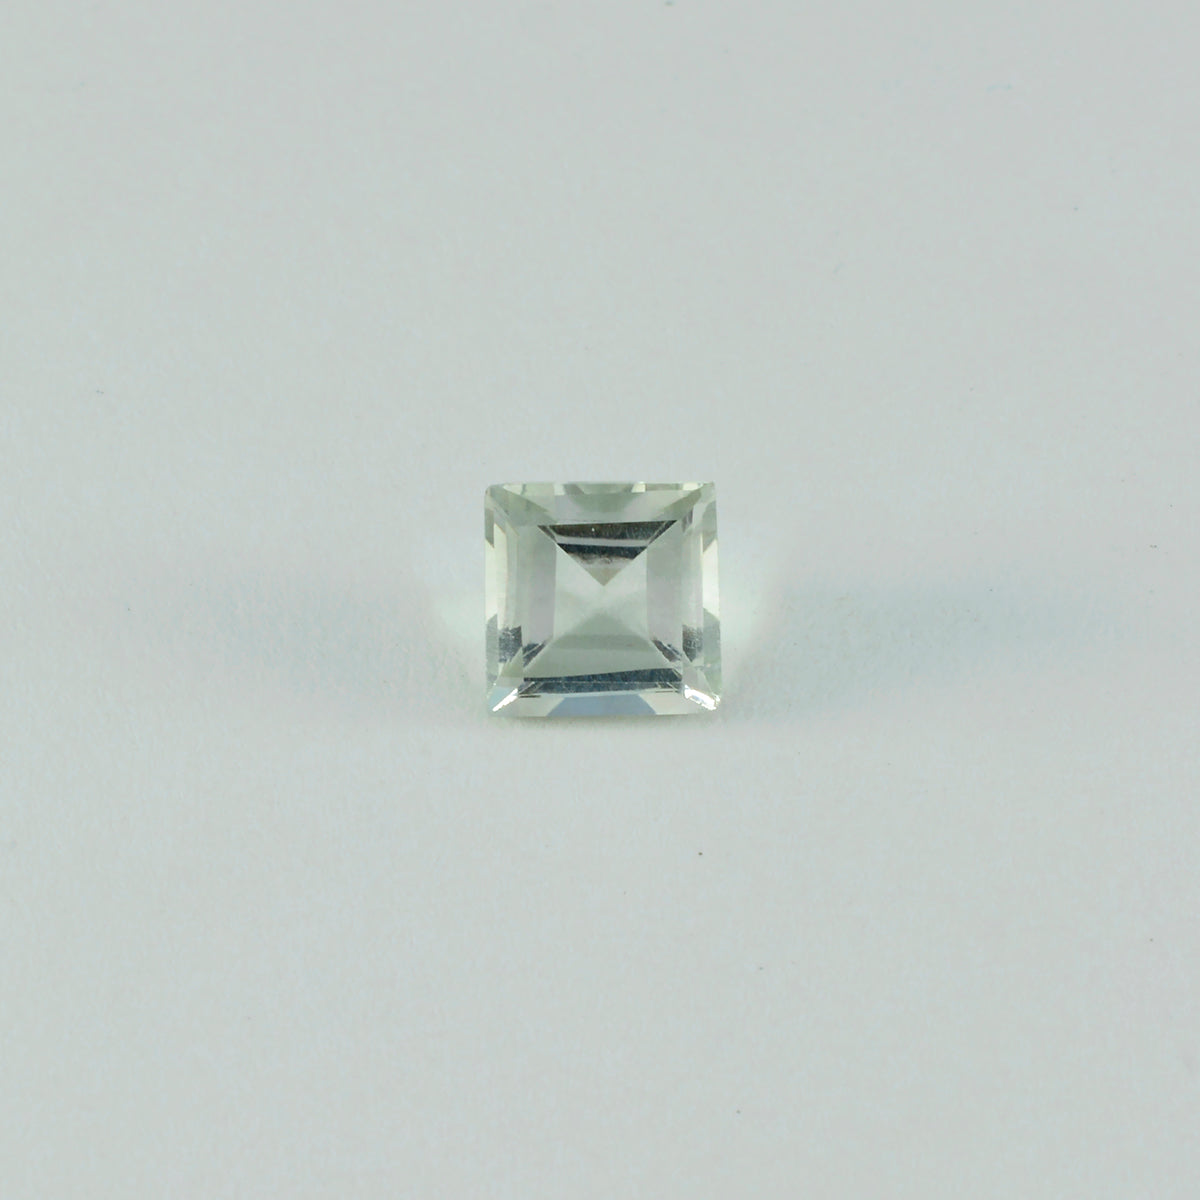 Riyogems 1PC Green Amethyst Faceted 14x14 mm Square Shape A+1 Quality Stone